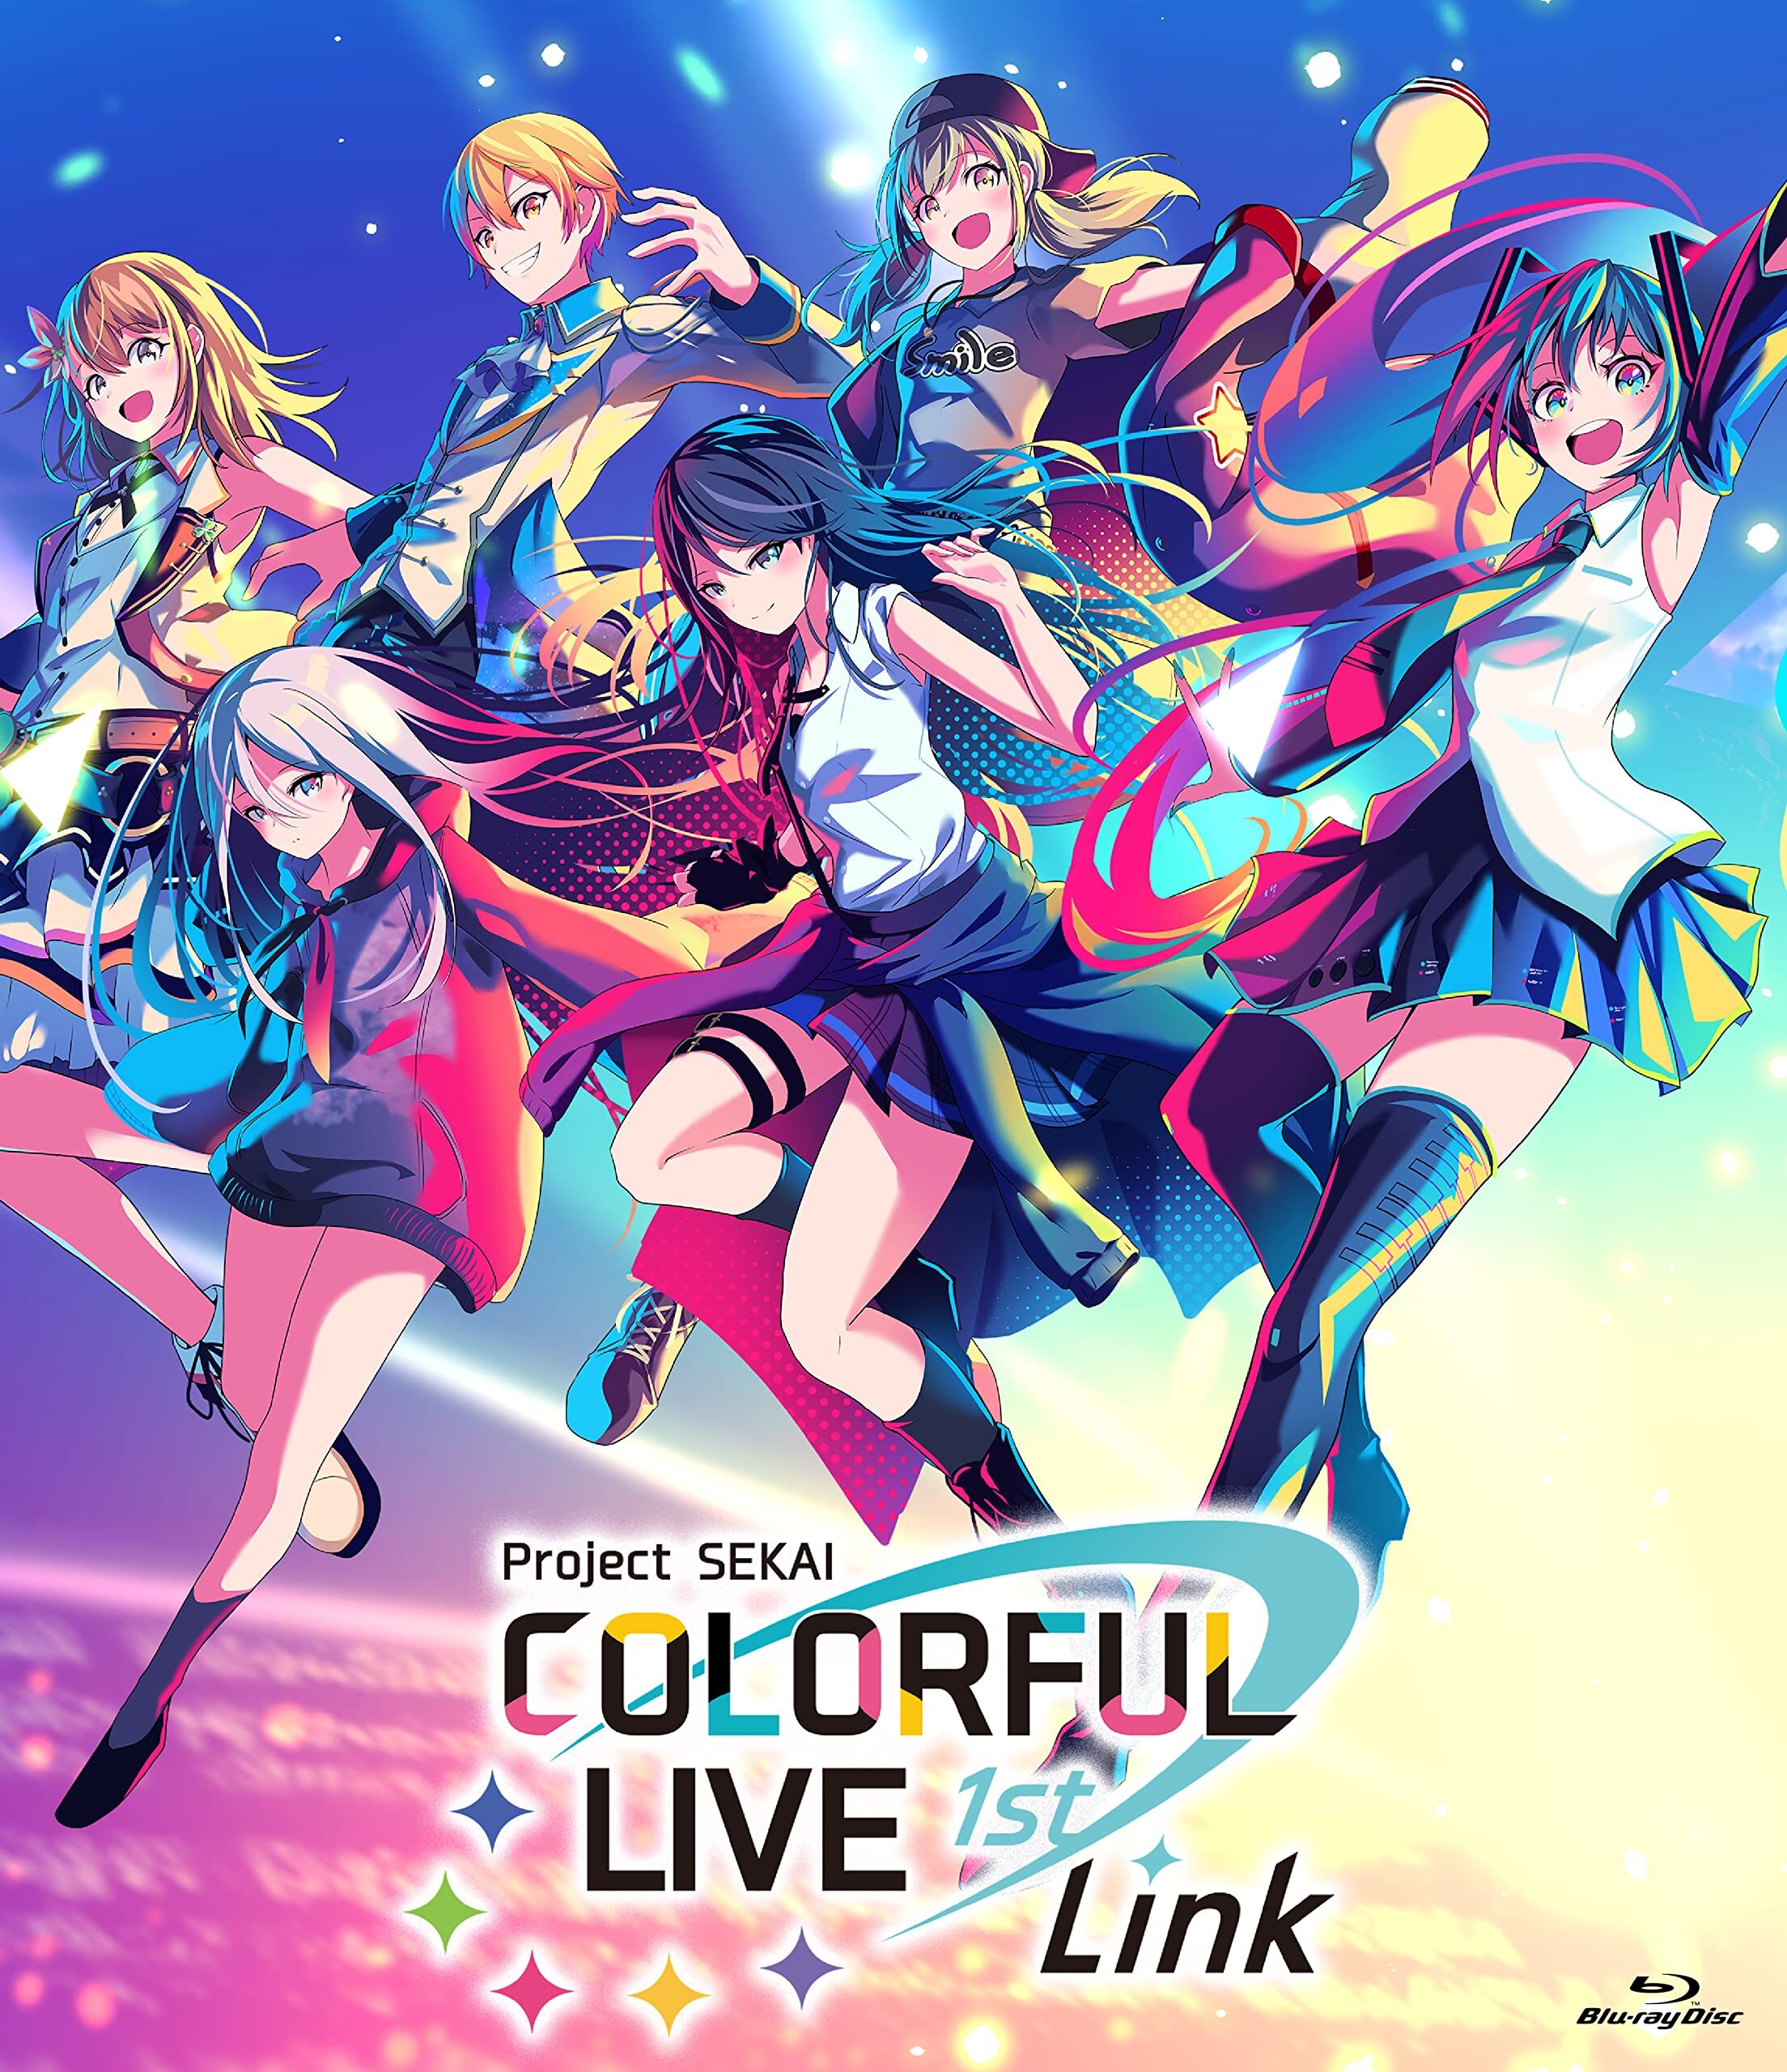 Project SEKAI COLORFUL LIVE 1st -Link- Blu-ray (プロジェクトセカイ 